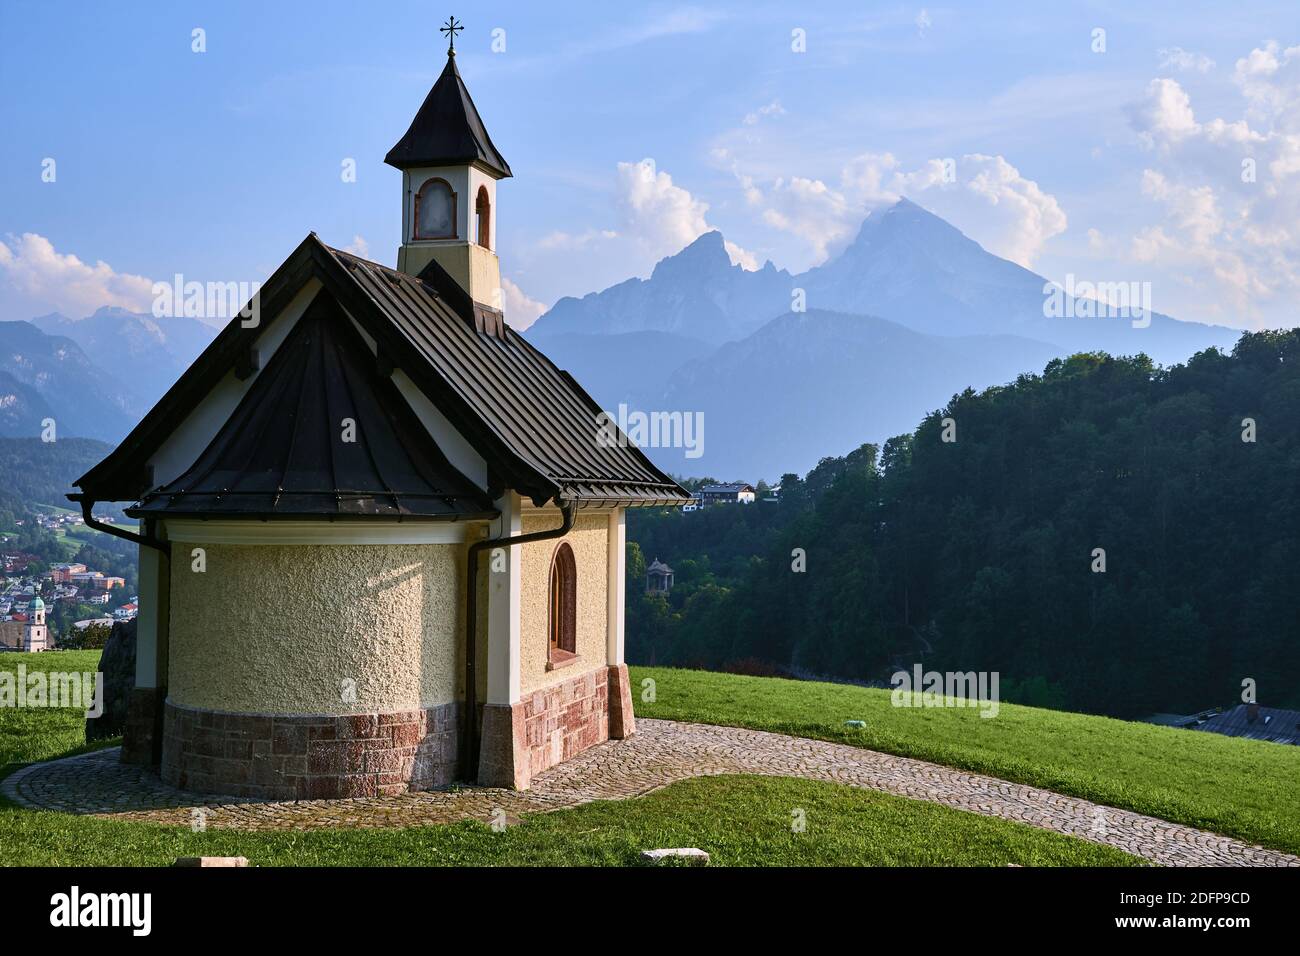 Small Kirchleitn chapel and alpine landscape with Watzmann mountain in the background in Berchtesgaden, Germany Stock Photo